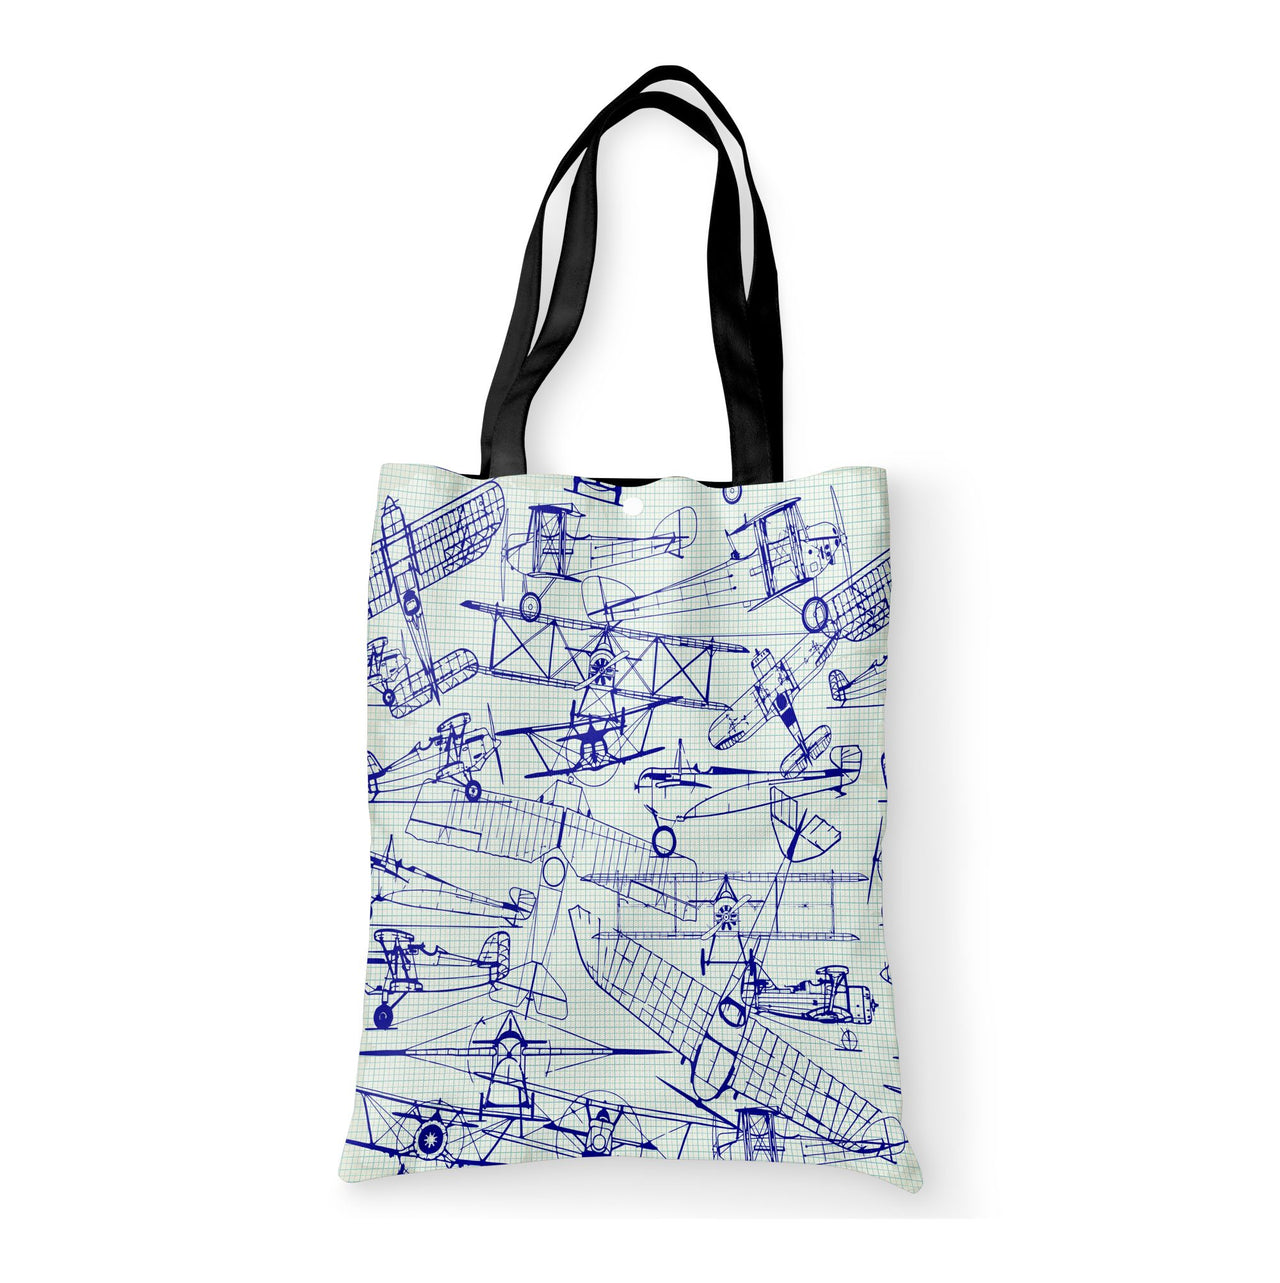 Amazing Drawings of Old Aircrafts Designed Tote Bags